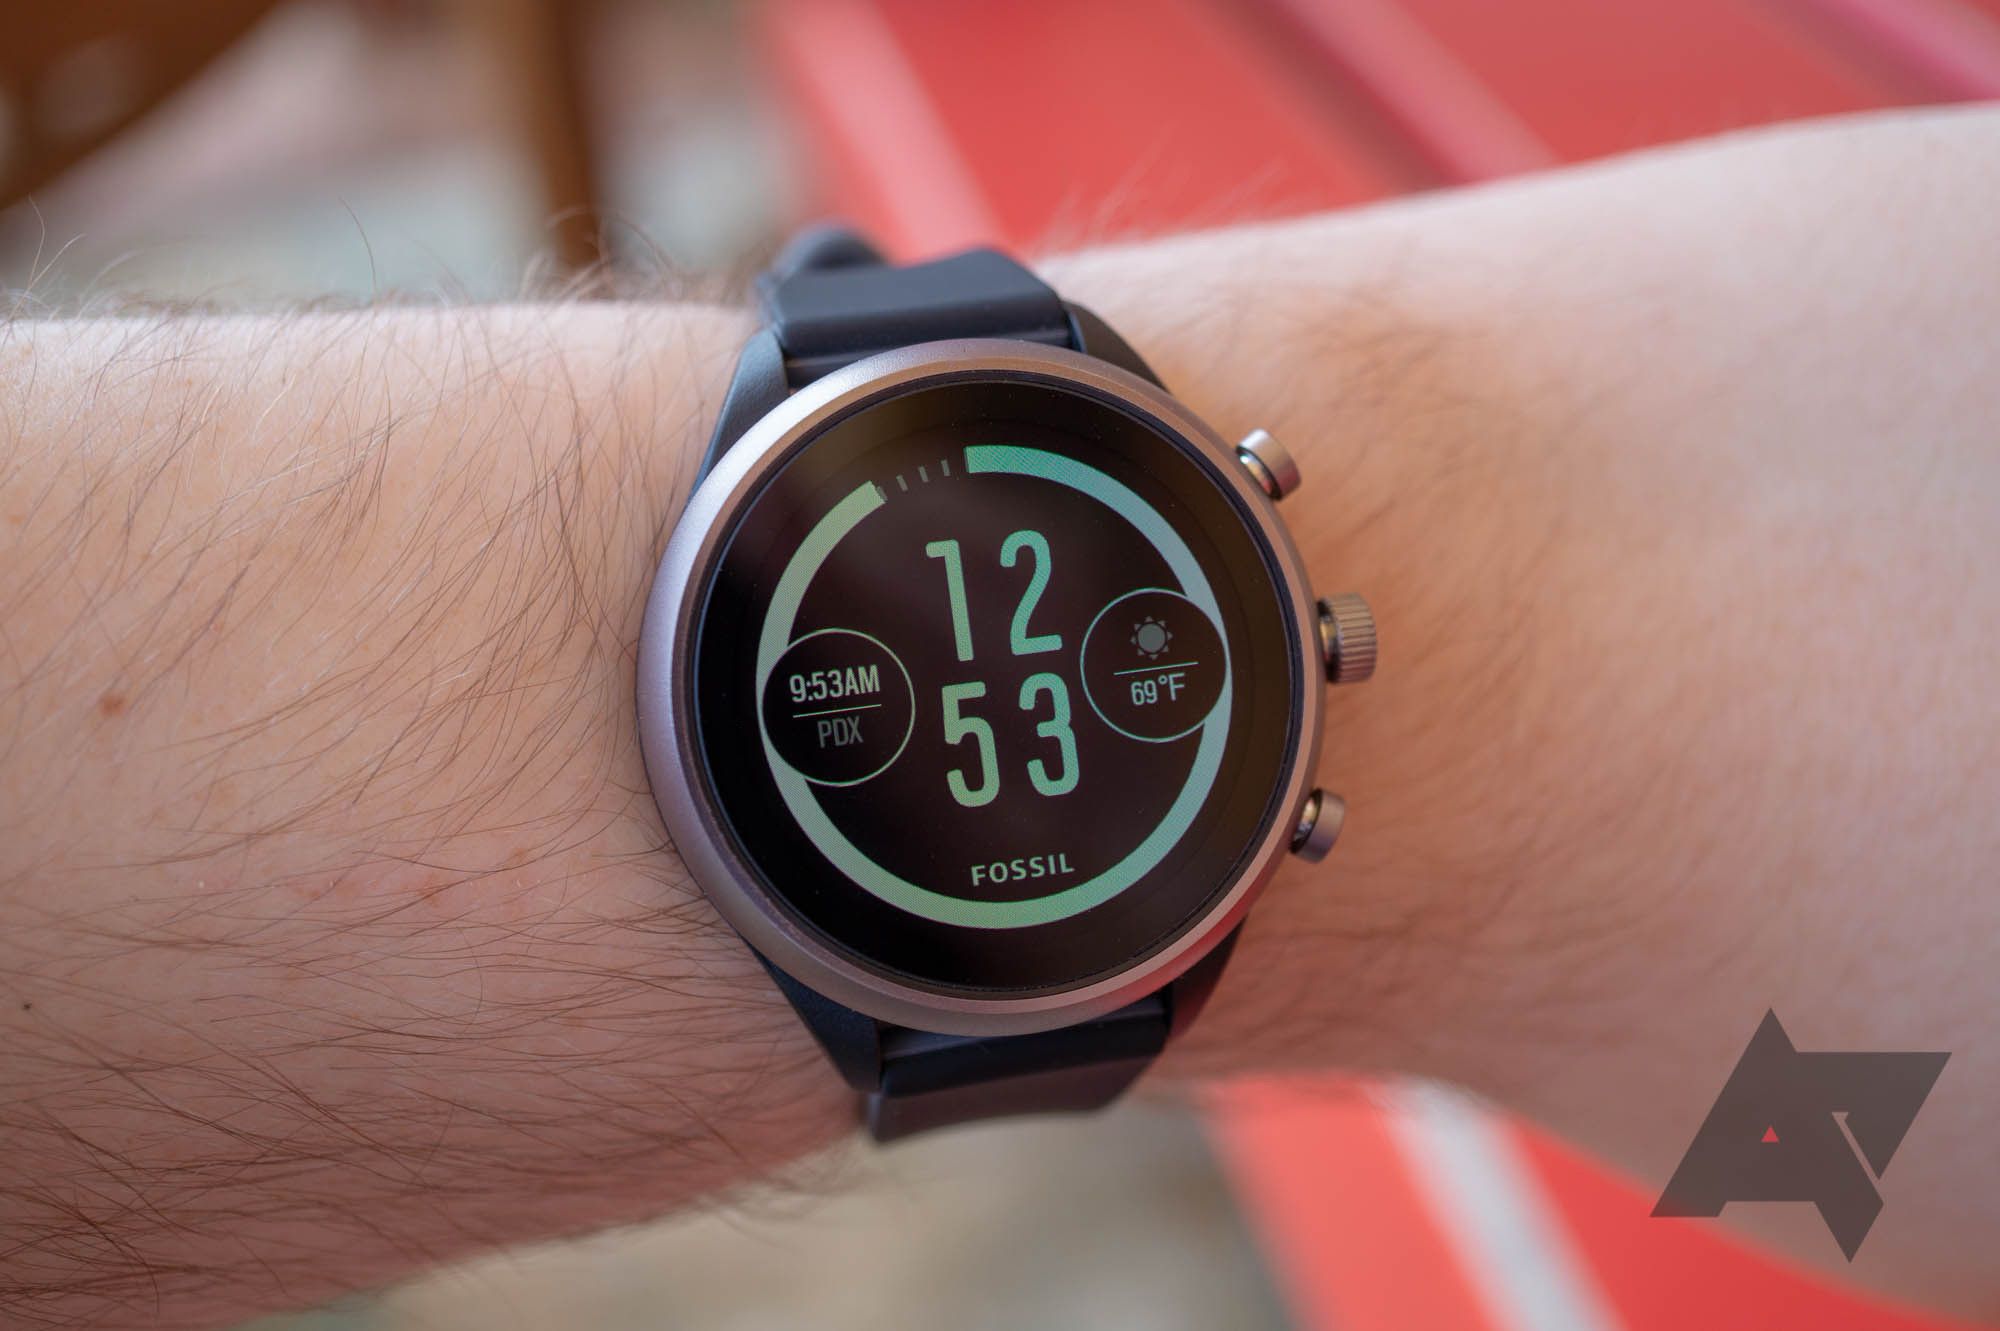 The Fossil Sport smartwatch is just $90 right now at Amazon